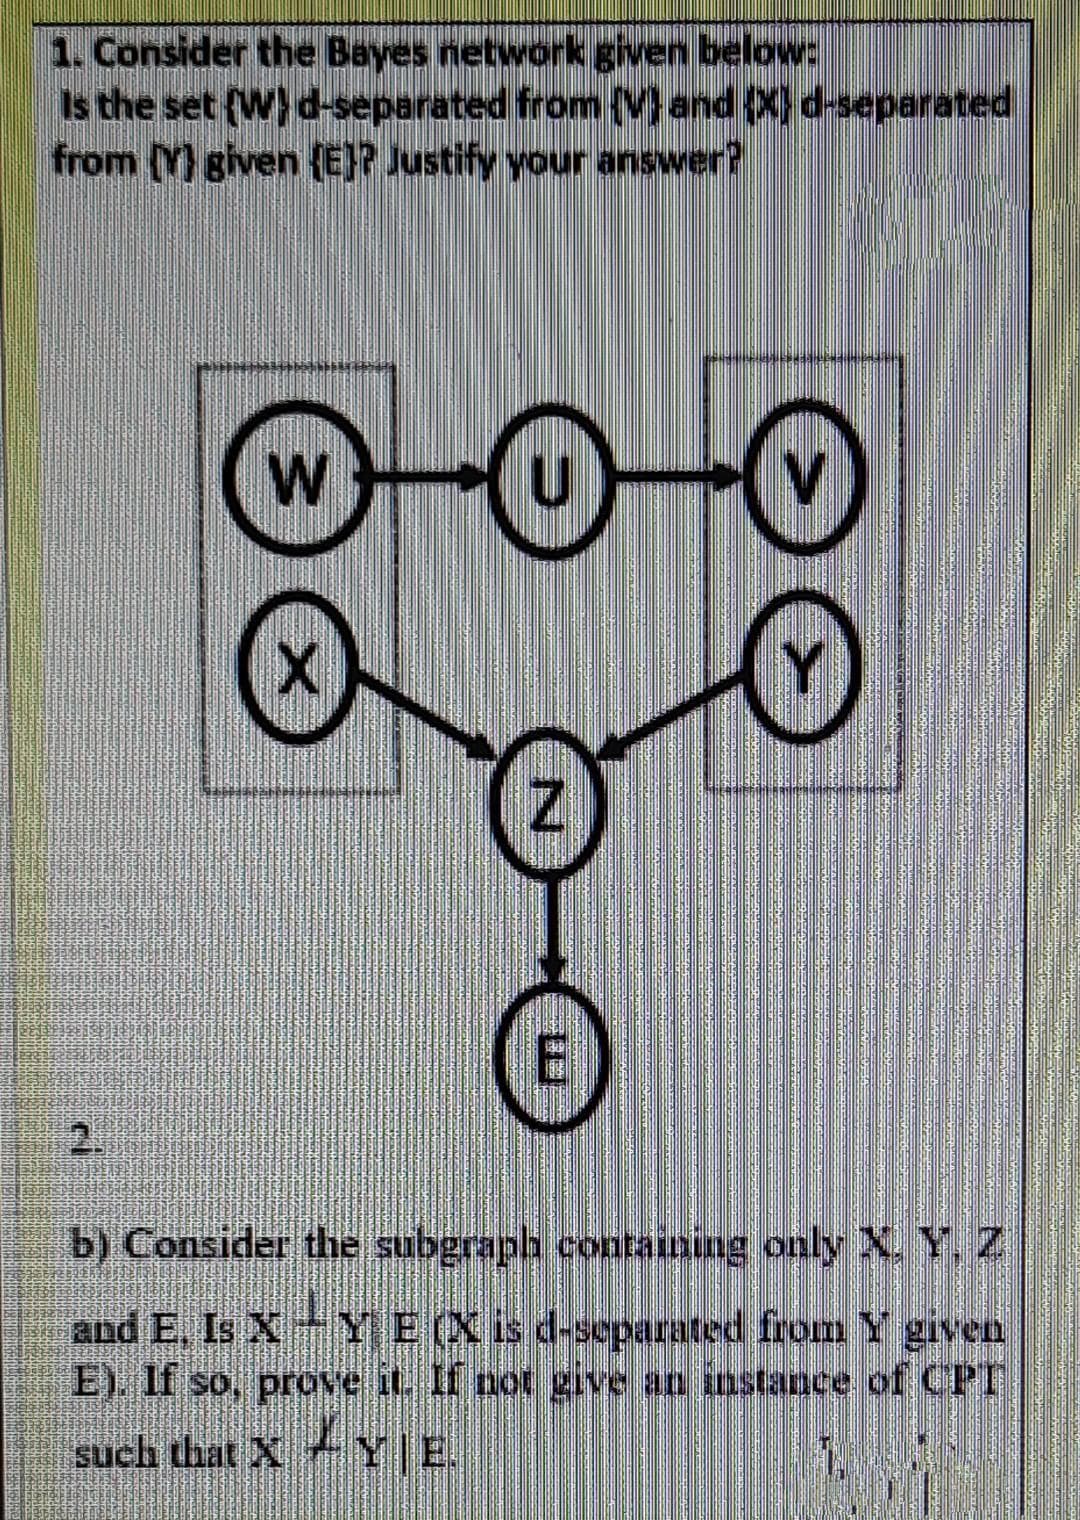 1. Consider the Bayes network given below:
Is the set (W)d-separated from {Mand (X)d-separated
from () given (E}? Justify your answer?
W
2.
b) Consider the subgraph containing only X. Y, Z
and E, Is X YE(X is d-separated from Y given
E). If so, prove it. If not give an instance of CPT
such that X YE.
